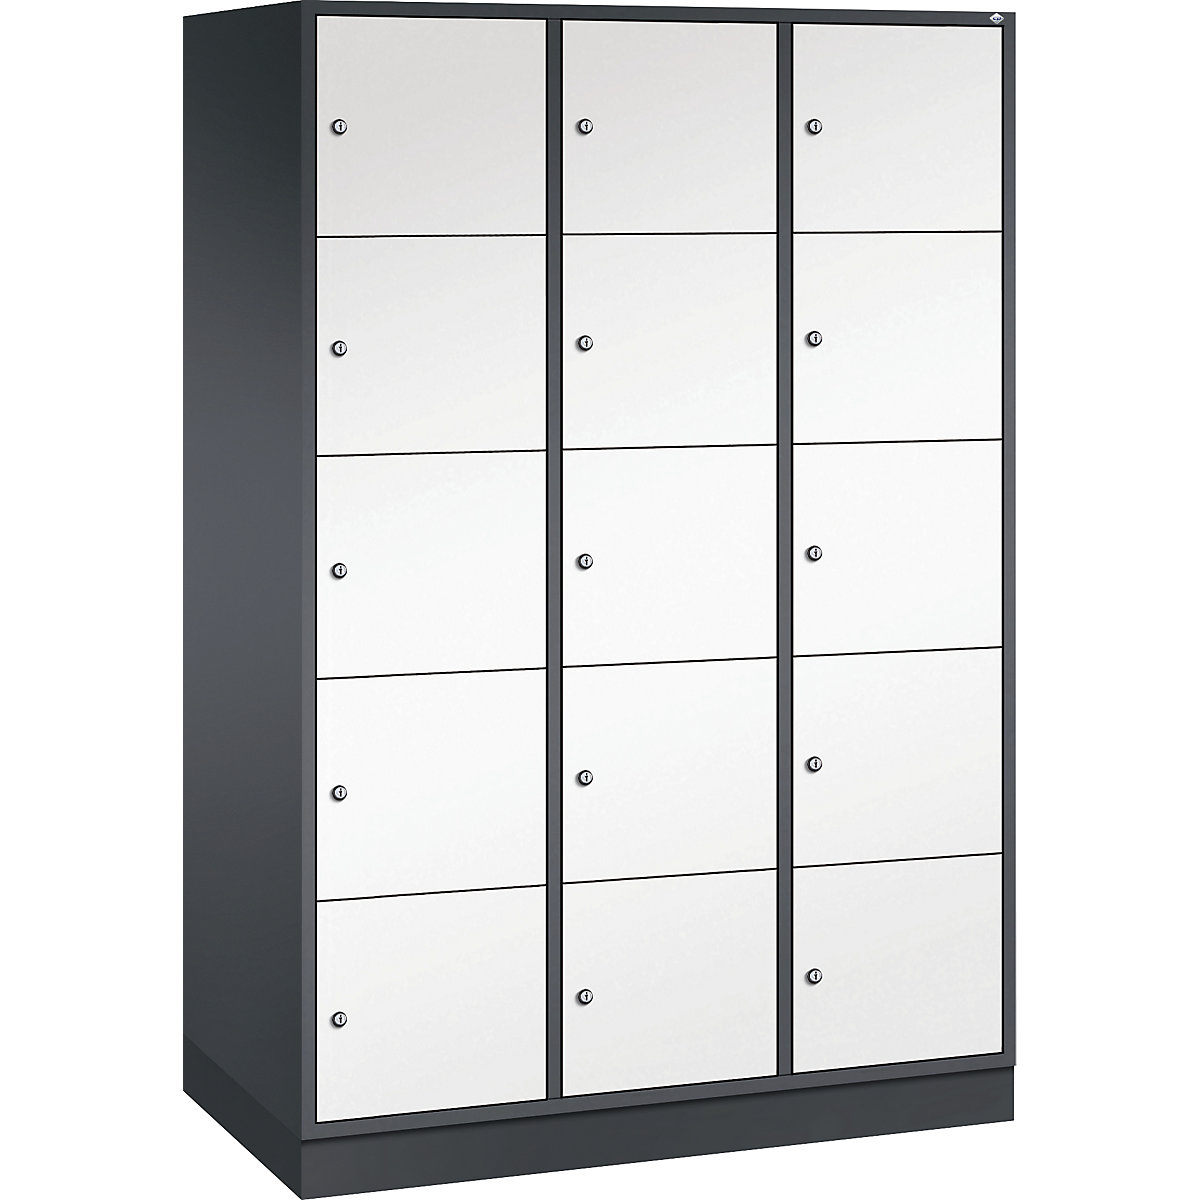 INTRO steel compartment locker, compartment height 345 mm – C+P